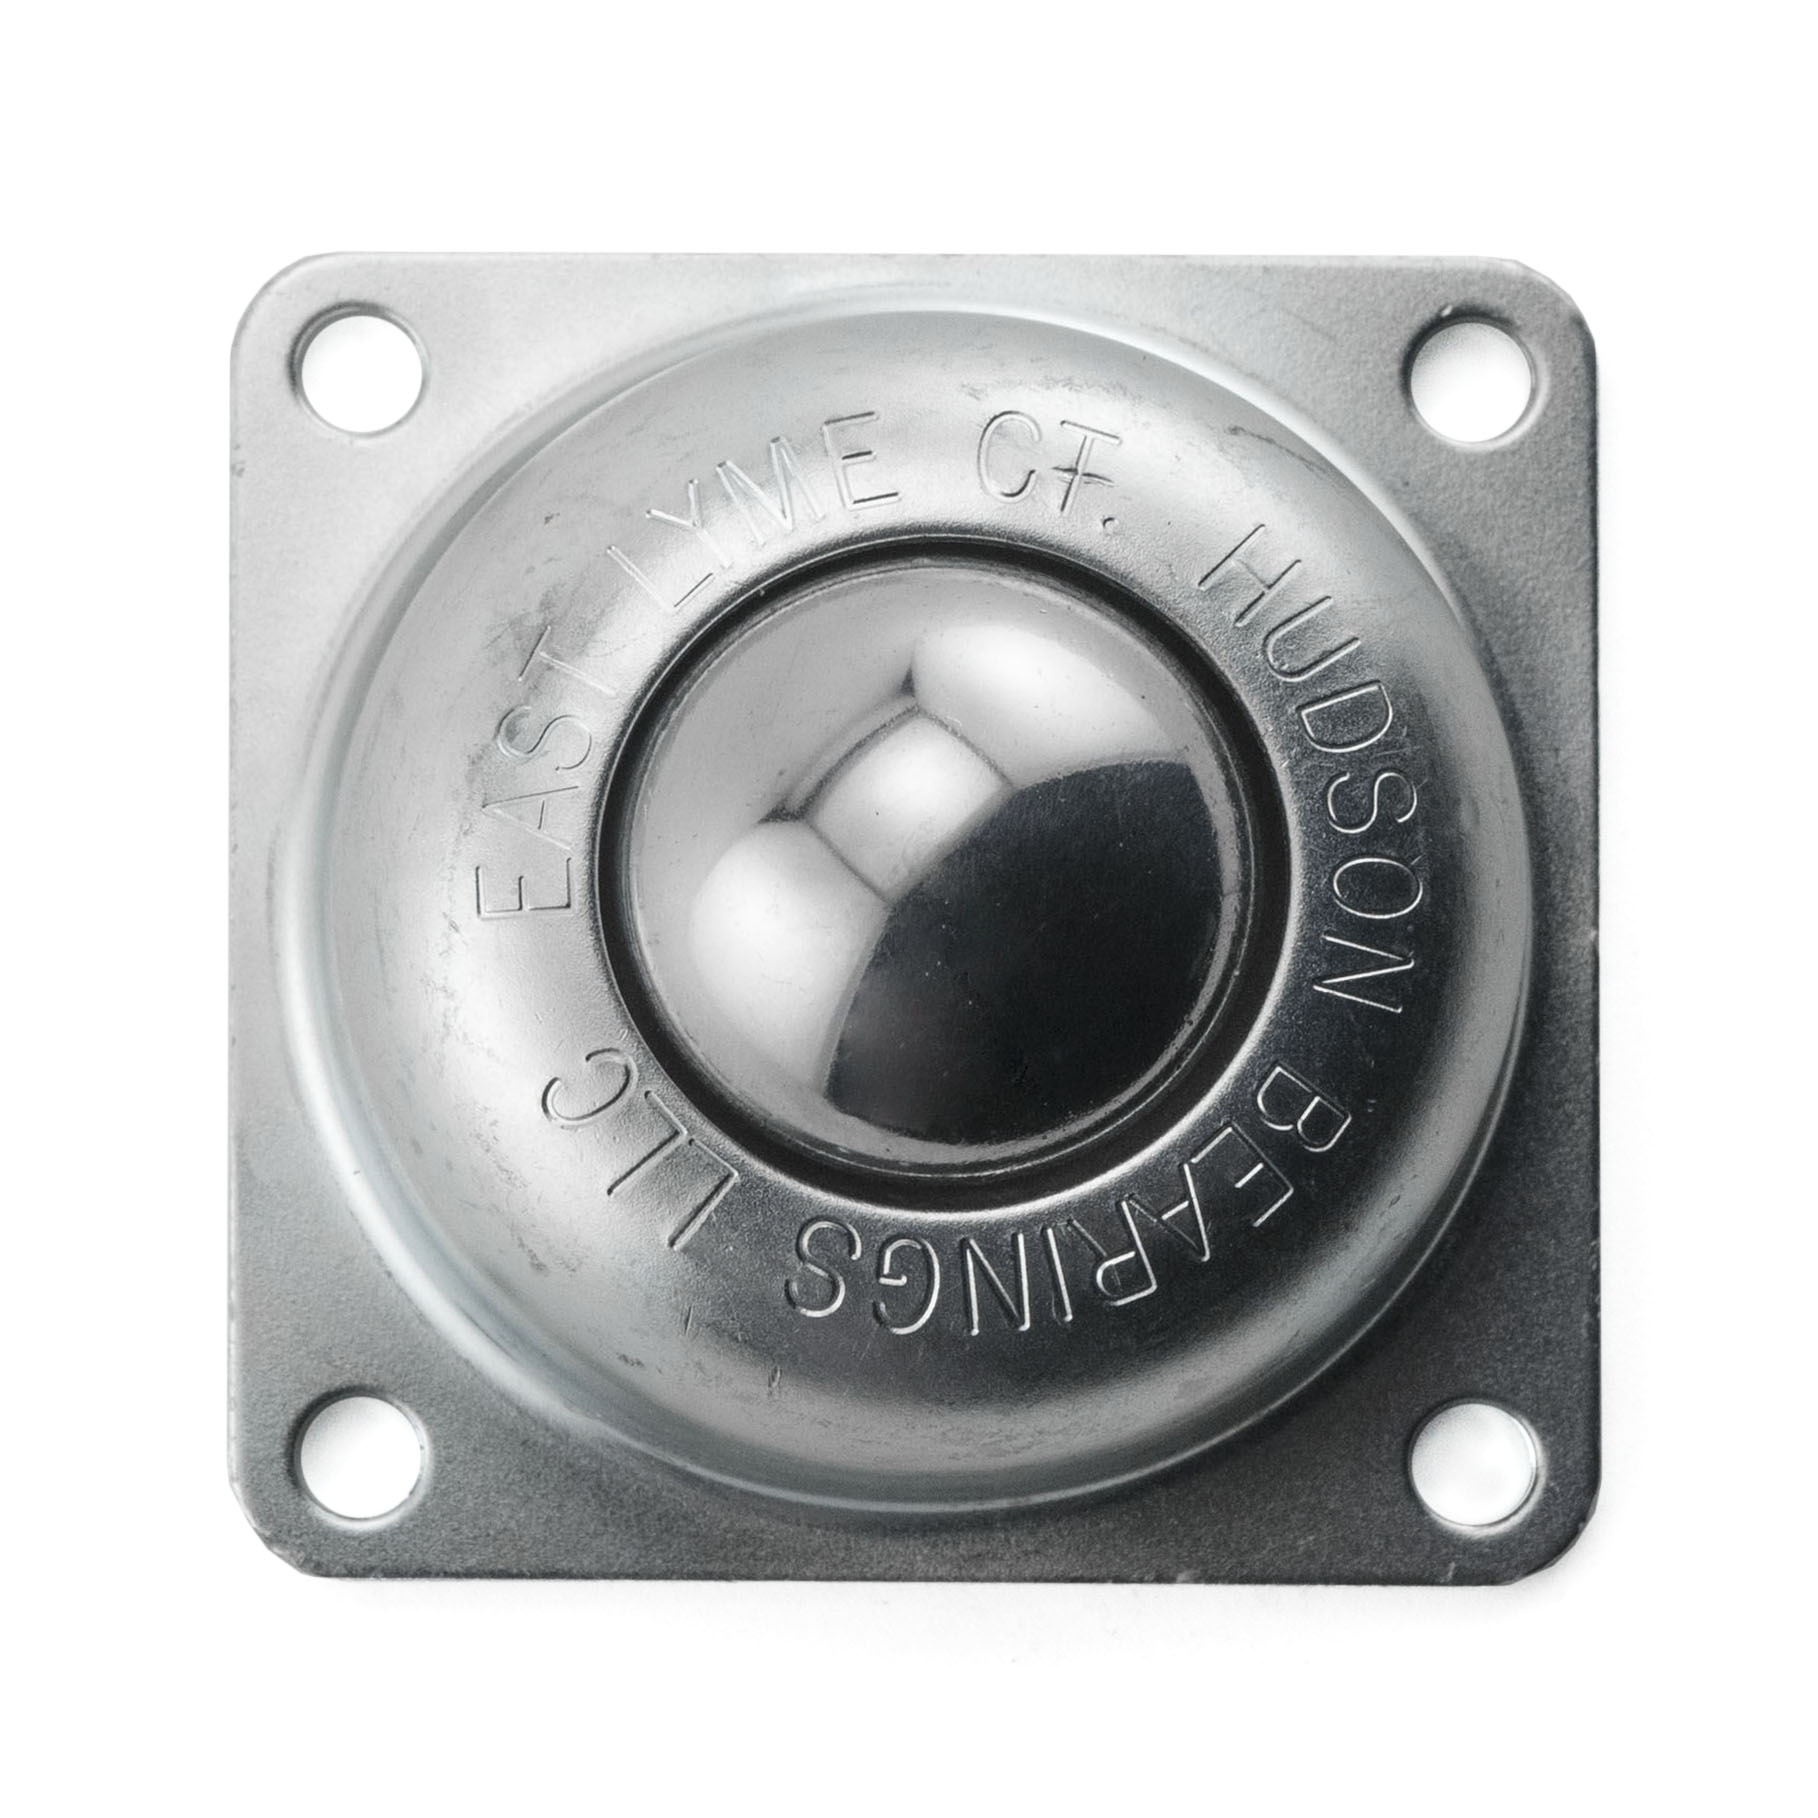 Ball Transfer; 1-1/2" ball; Stainless Steel; Flange (3"x3"; holes: 2-7/16"x2-7/16"; 1/4" bolt); Carbon Steel Housing; 250#; 1-13/16" load height (Item #89351)